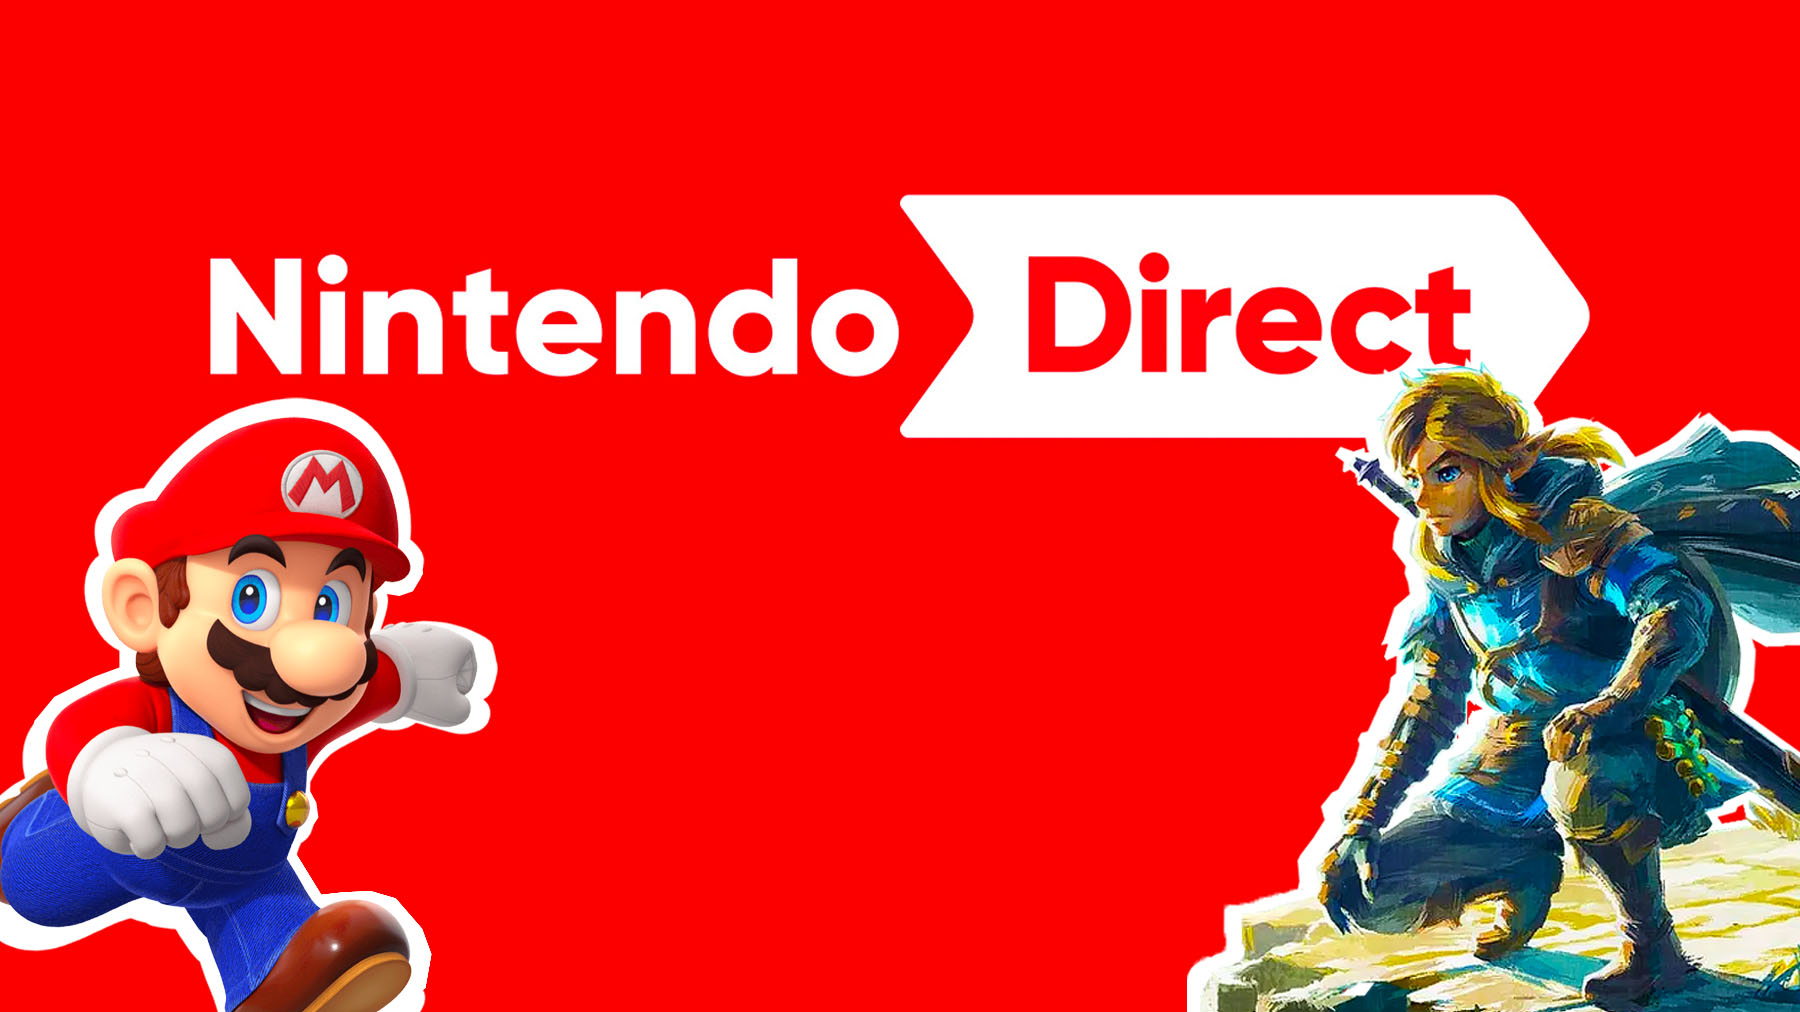 Nintendo Direct Live Blog the biggest Switch news as it happens